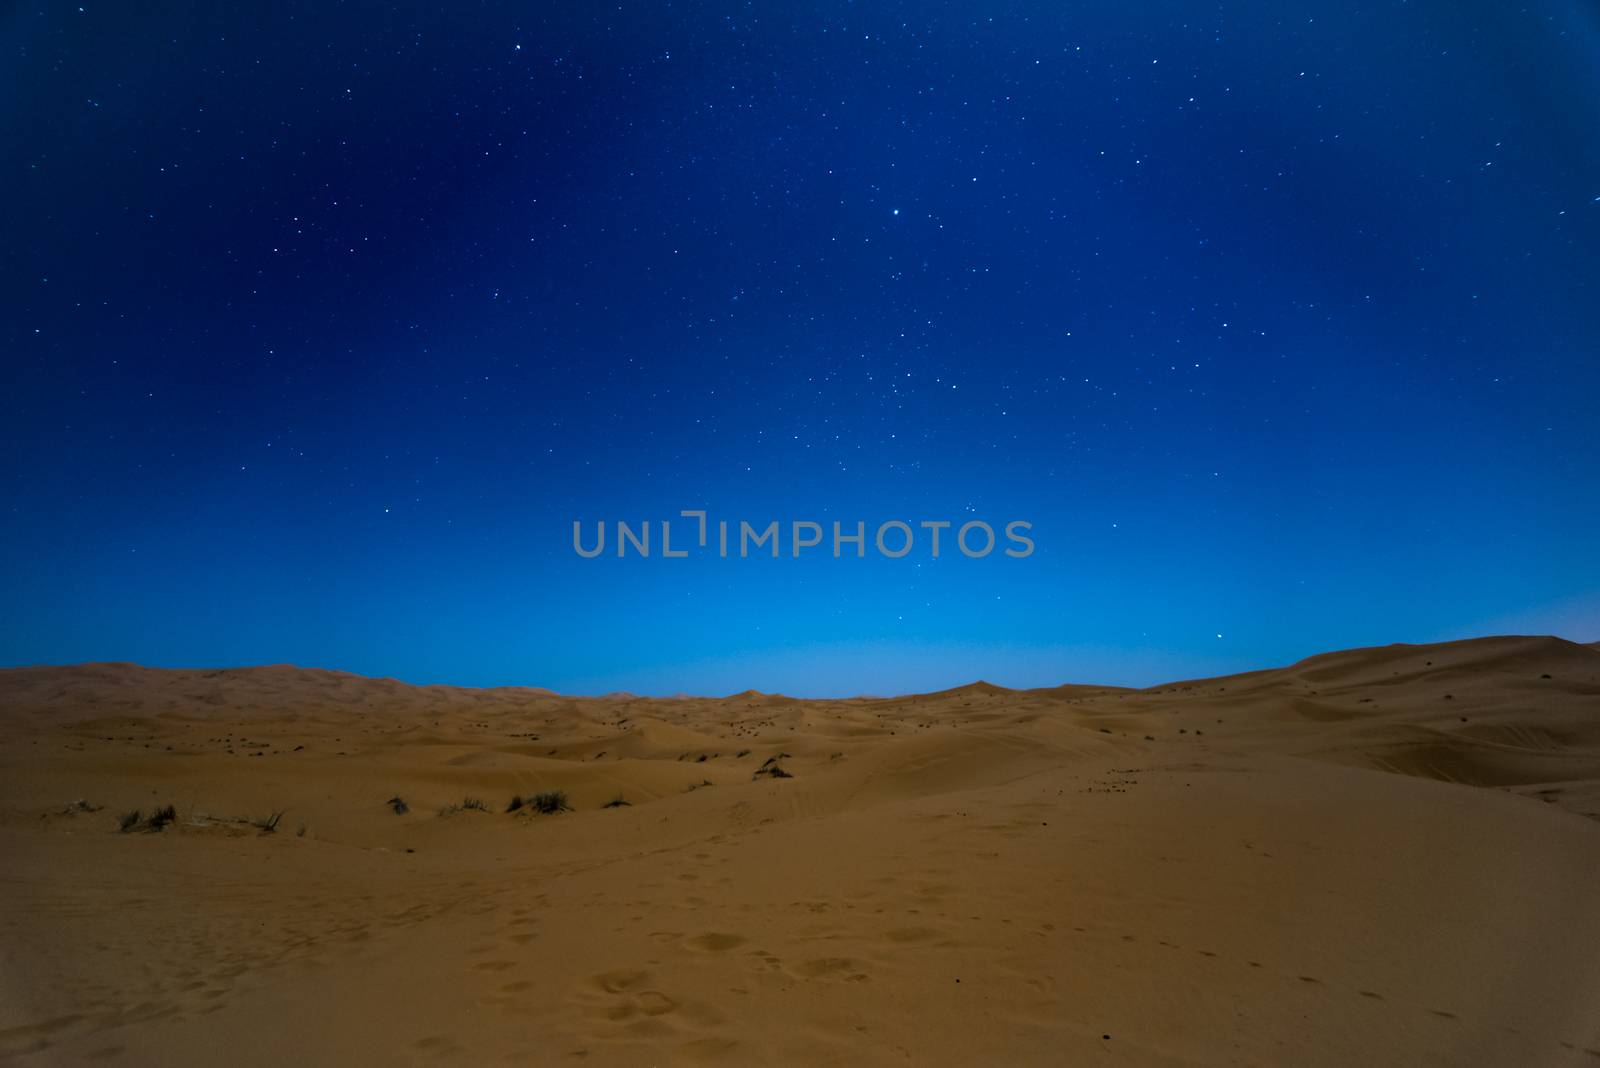 Stars at night over the dunes, Sahara Desert, Hassilabied, Morocco